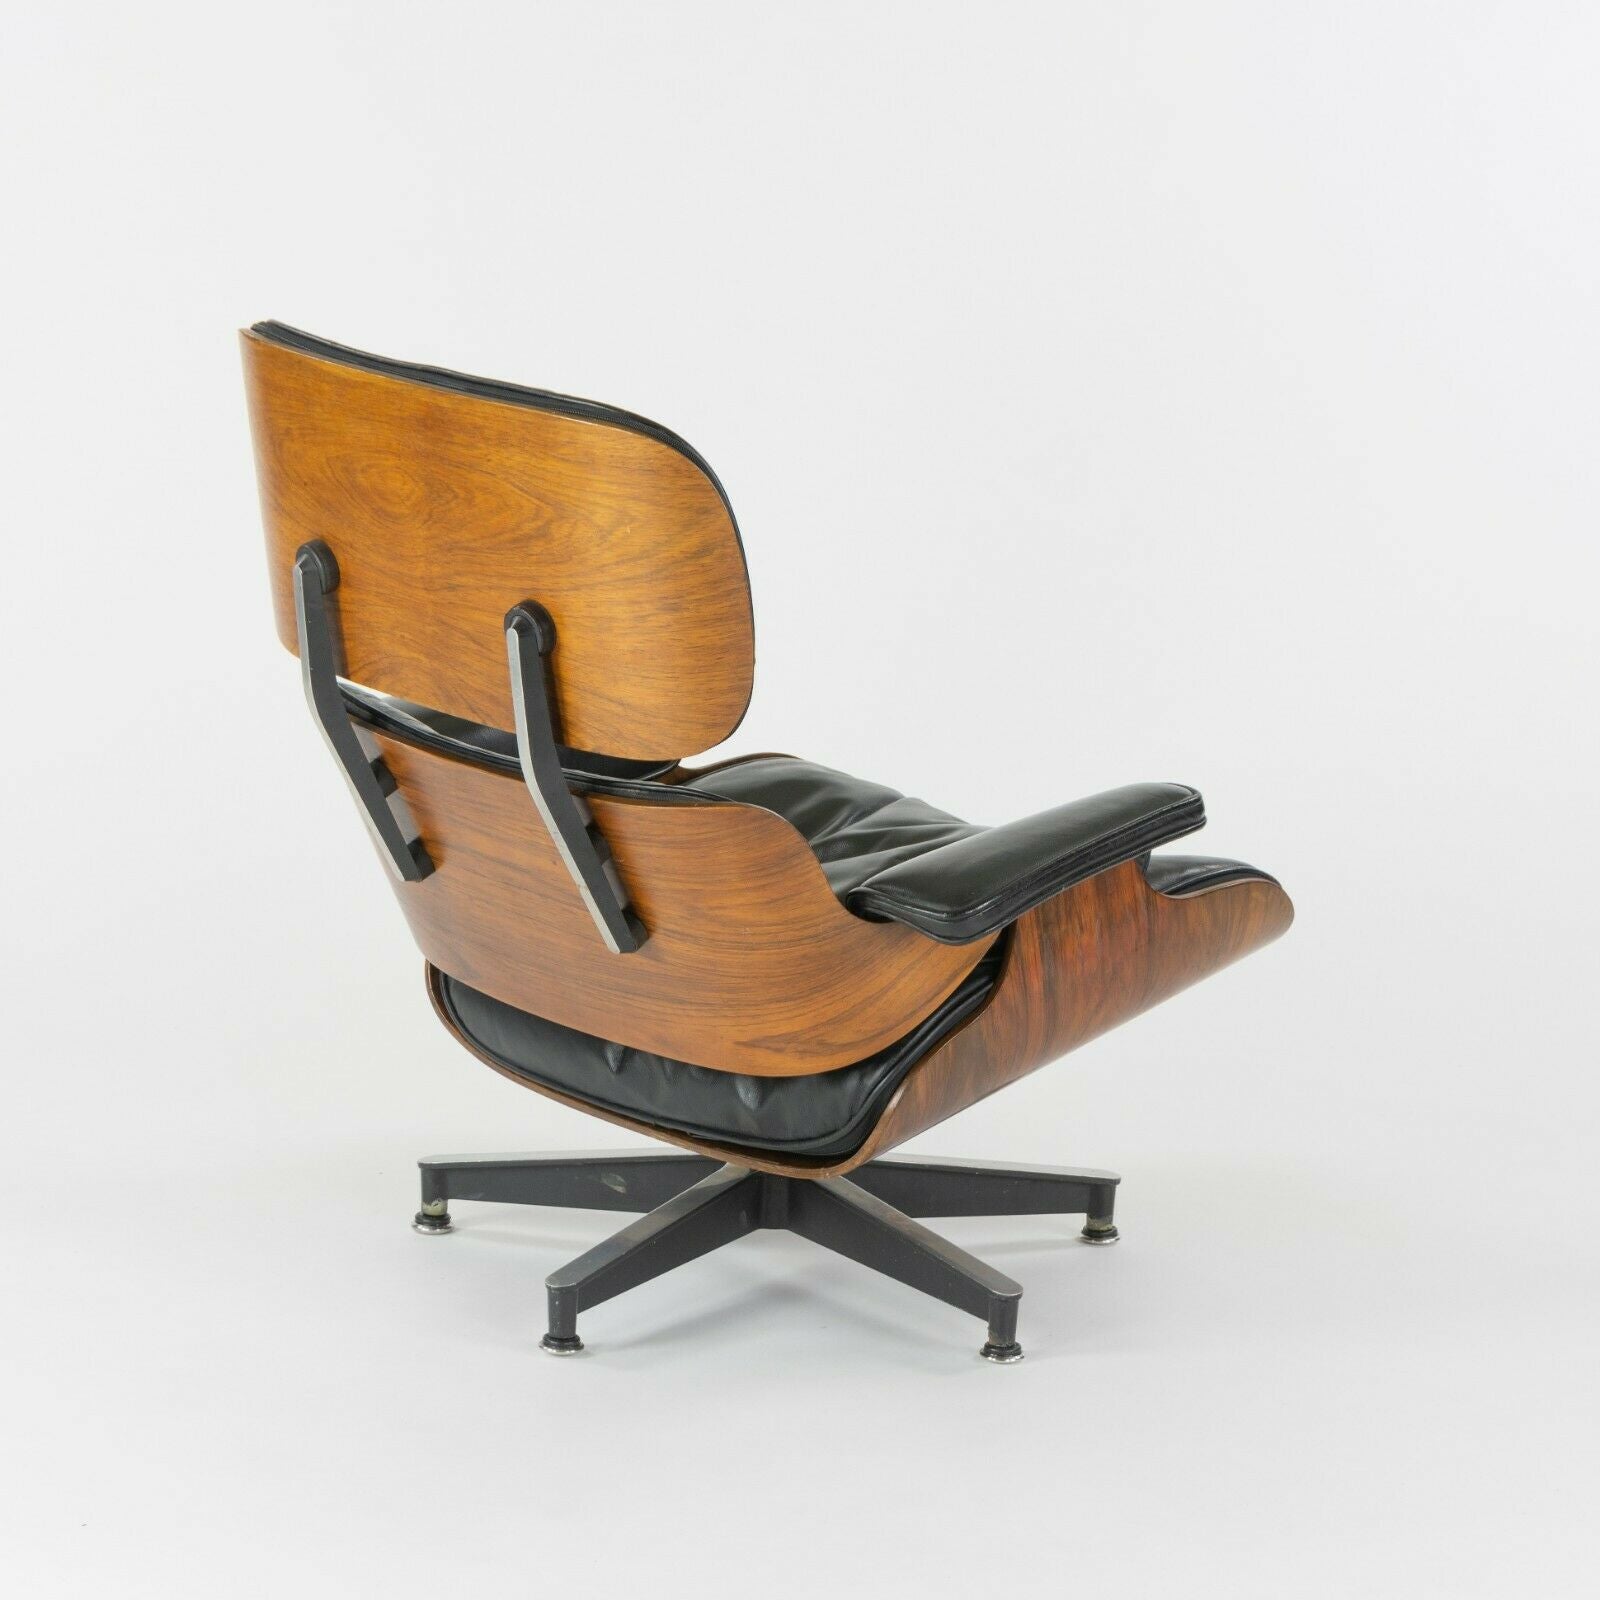 SOLD 1956 Holy Grail Herman Miller Eames Lounge Chair with Swivel Ottoman + Boot Glides + 3 Hole Arms